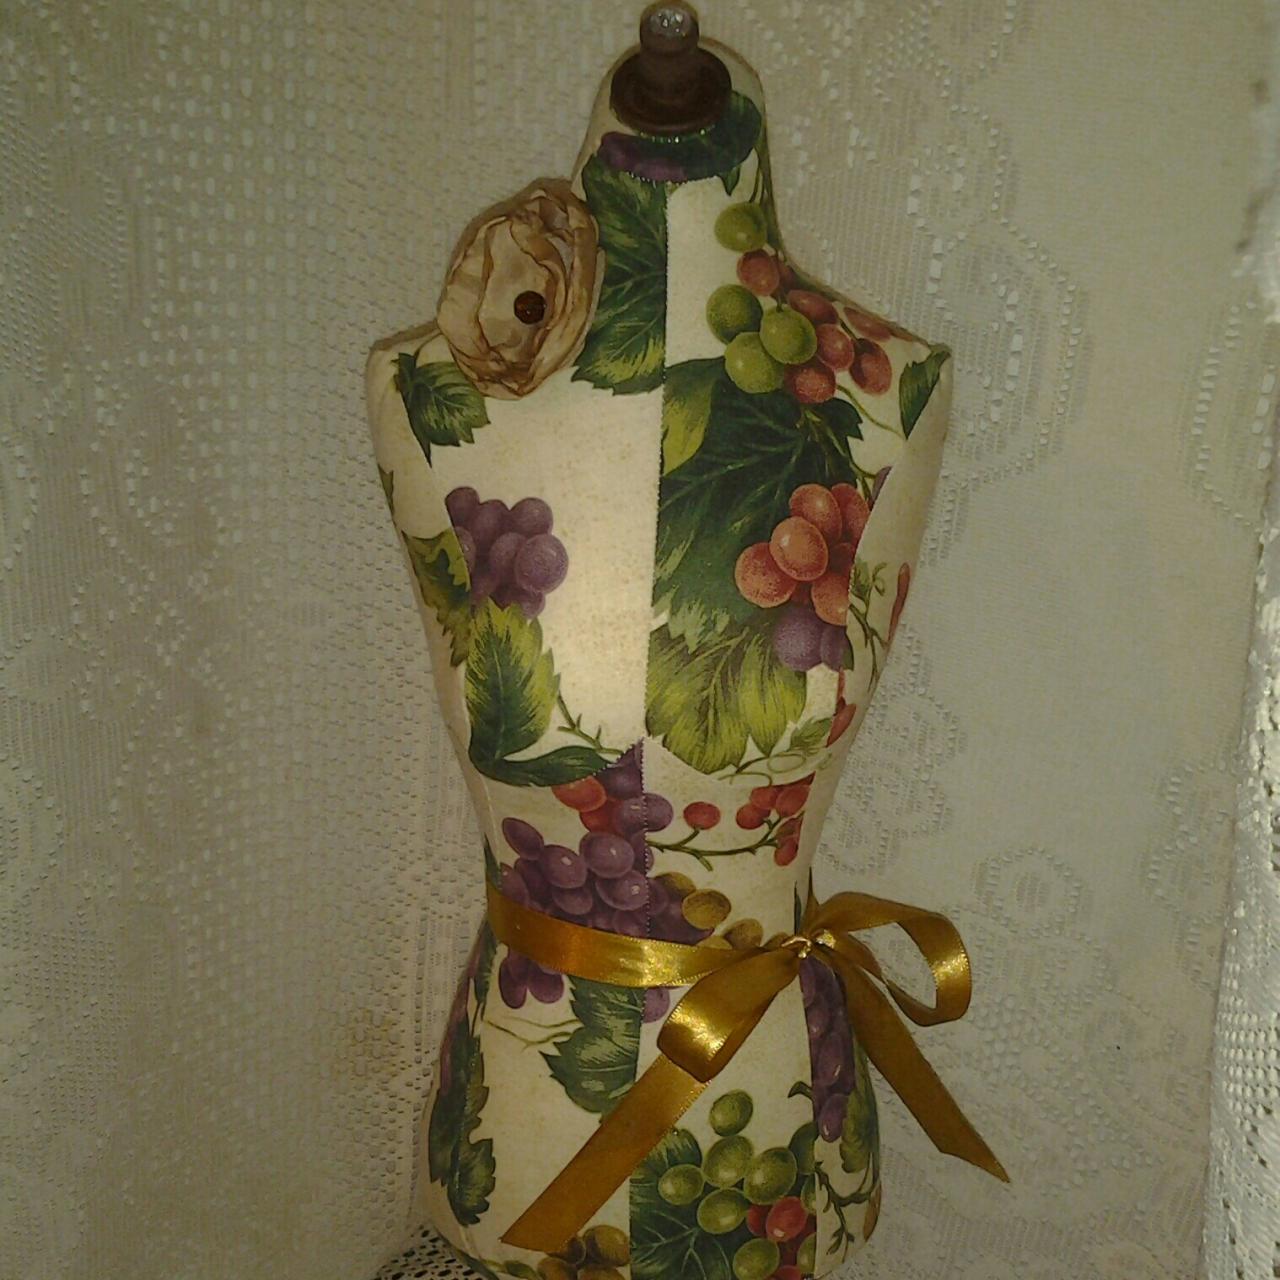 Boutique Dress Form Designs Jewelry Display, 22" Torso Great For Store Front Display Or Home Decor. Grapevine Wine Cellar Pattern.